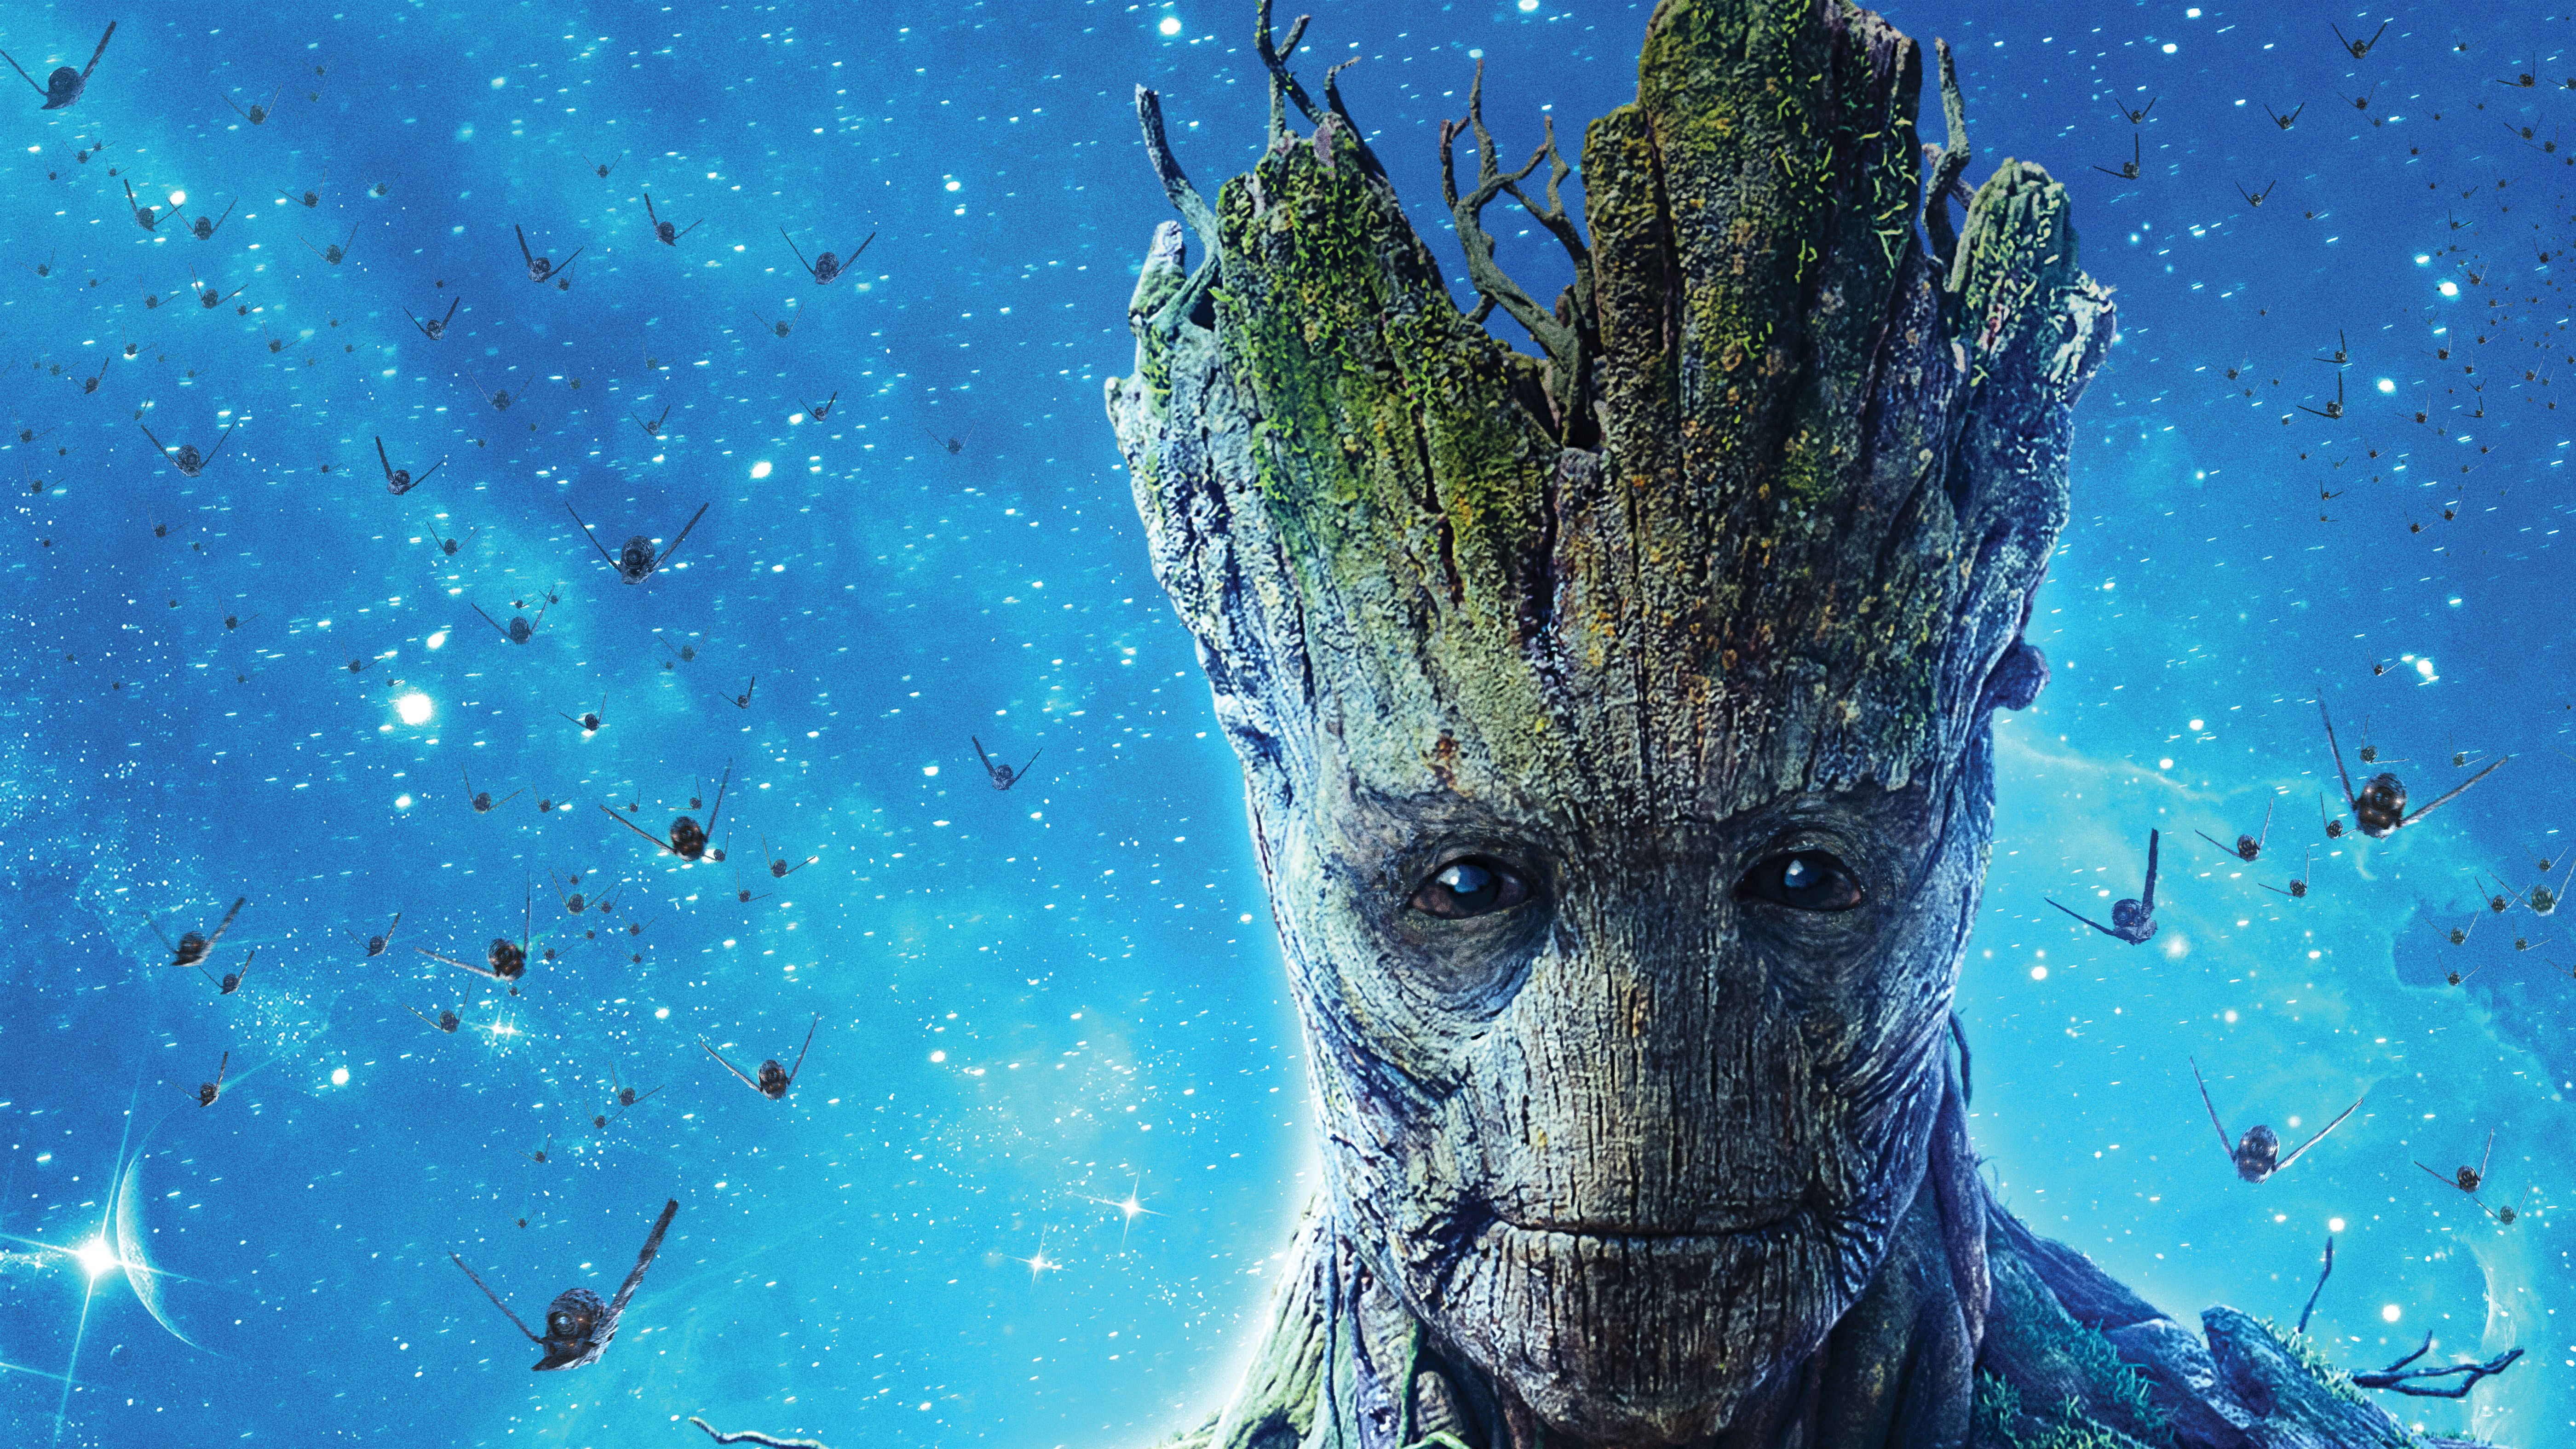 Movie Guardians of the Galaxy HD Wallpaper | Background Image